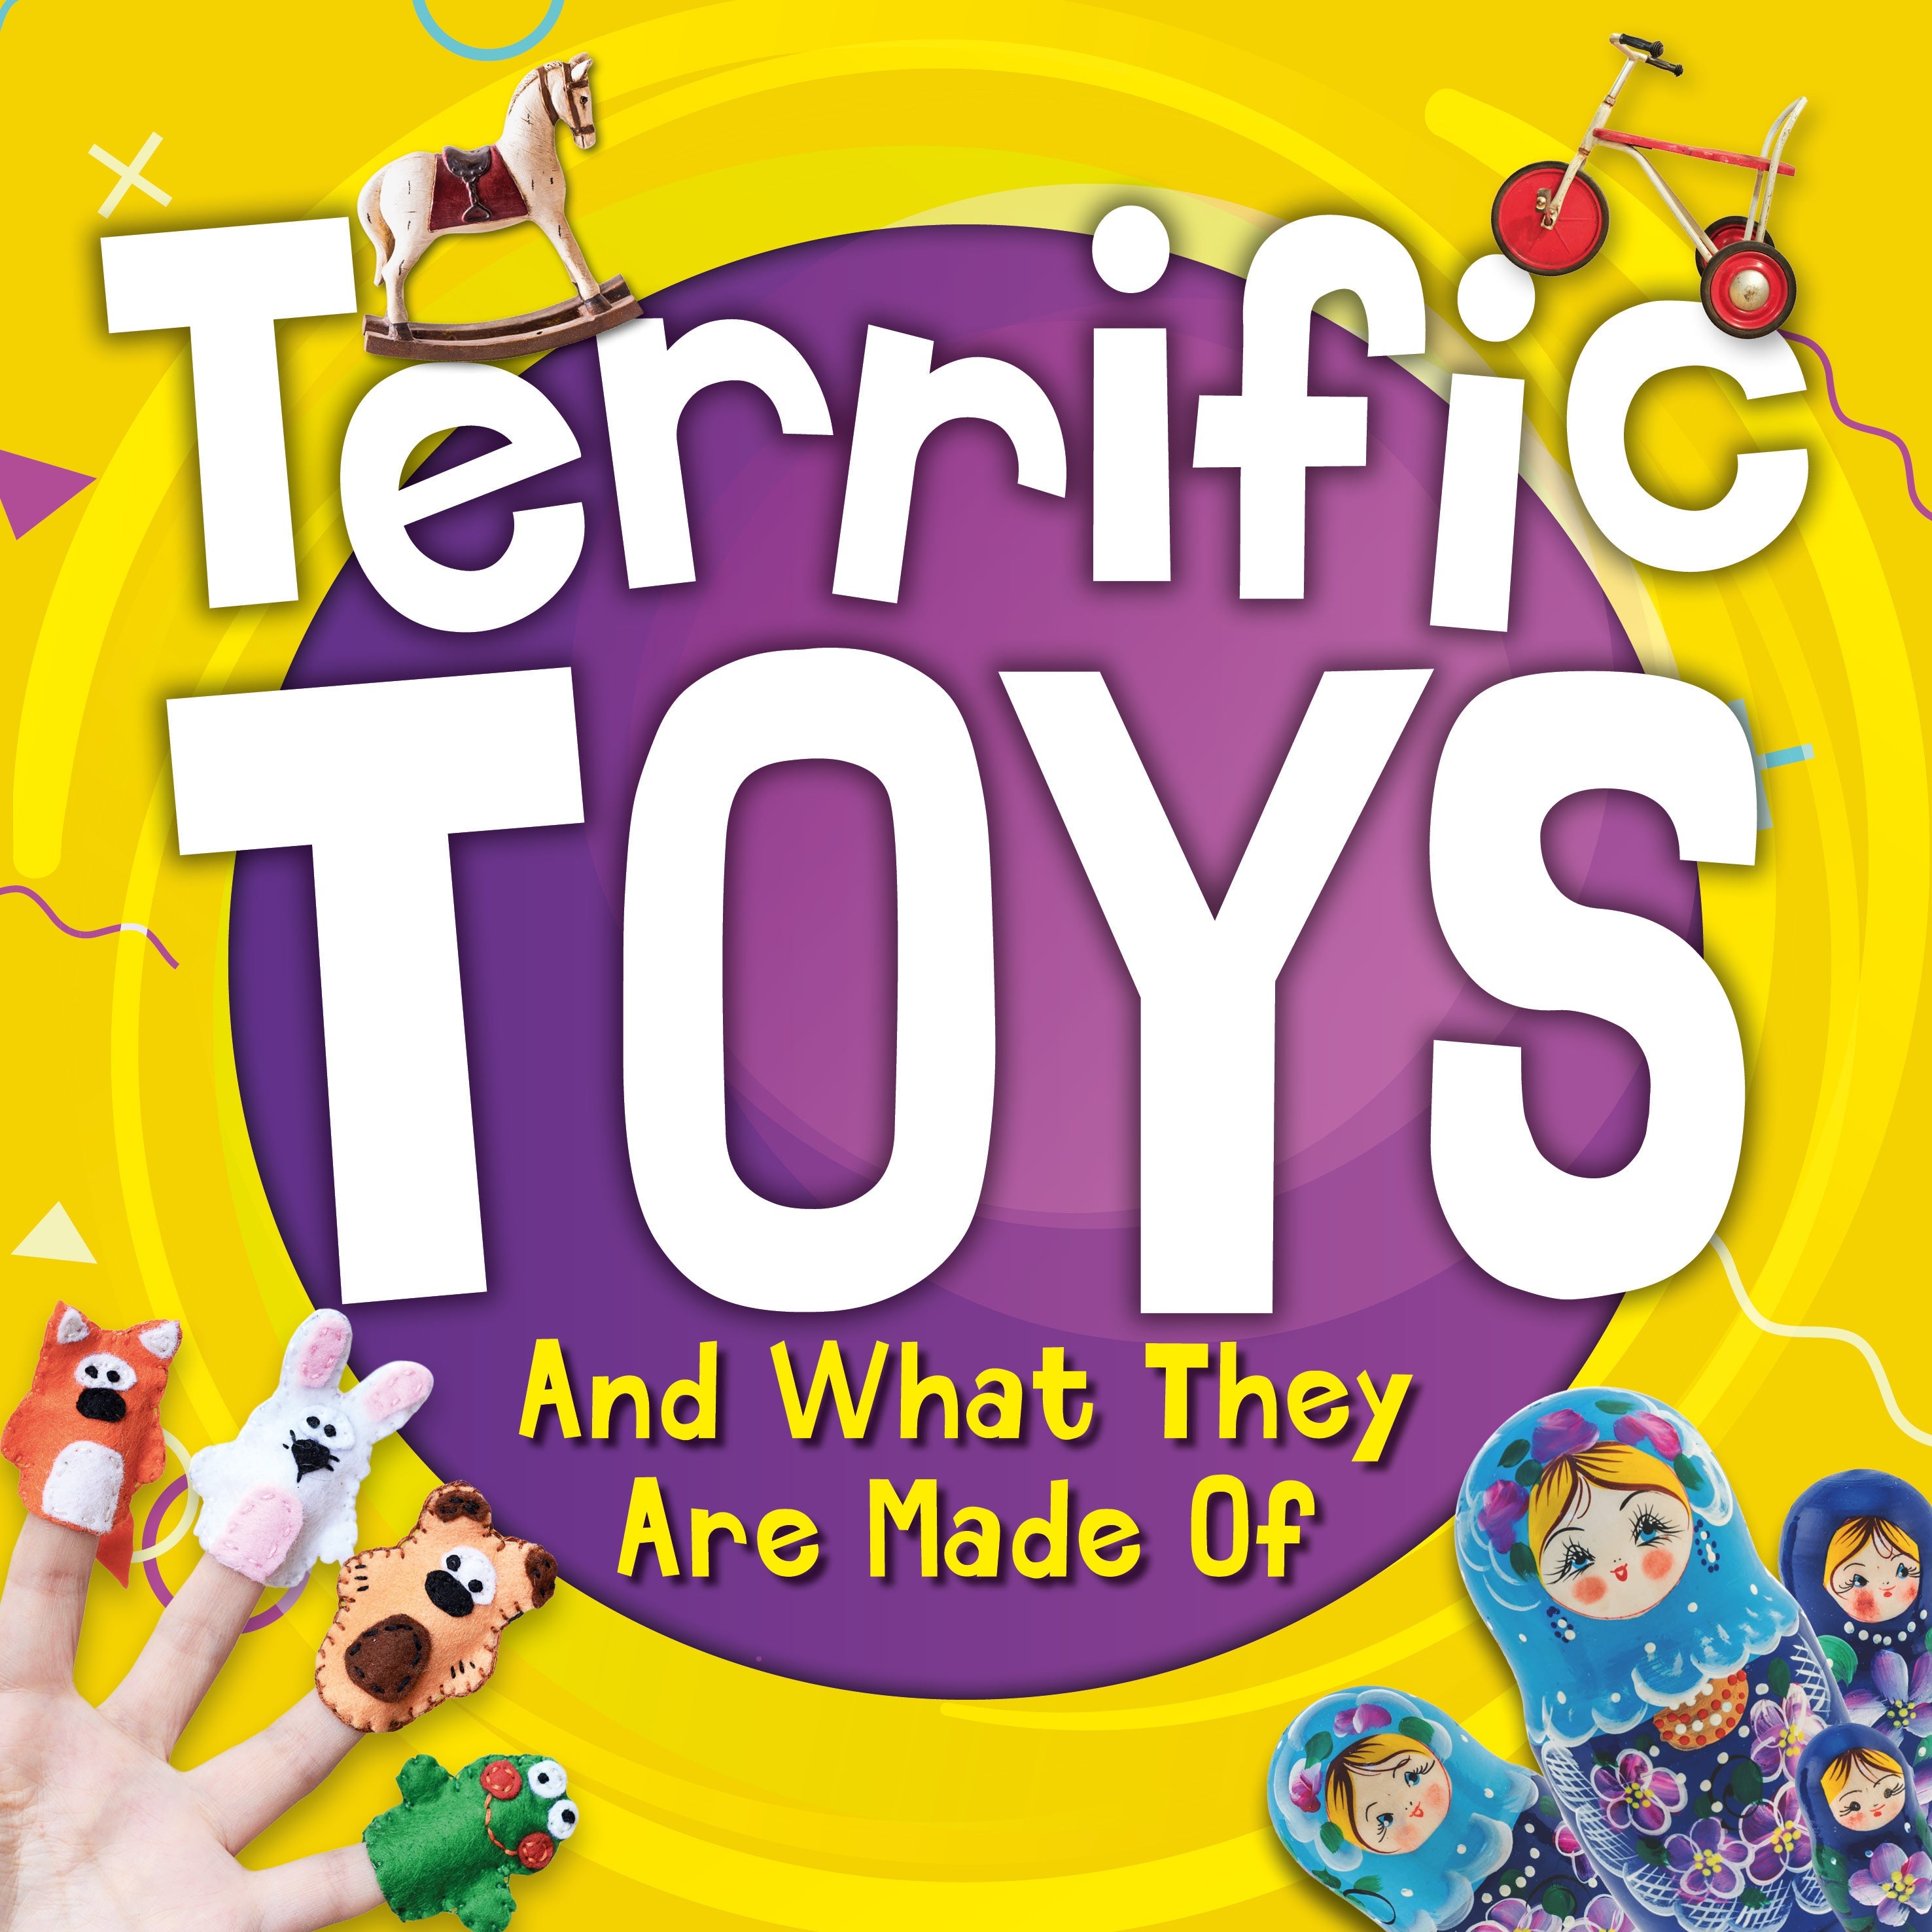 Terrific Toys: Terrific Toys and What They Are Made Of e-Book